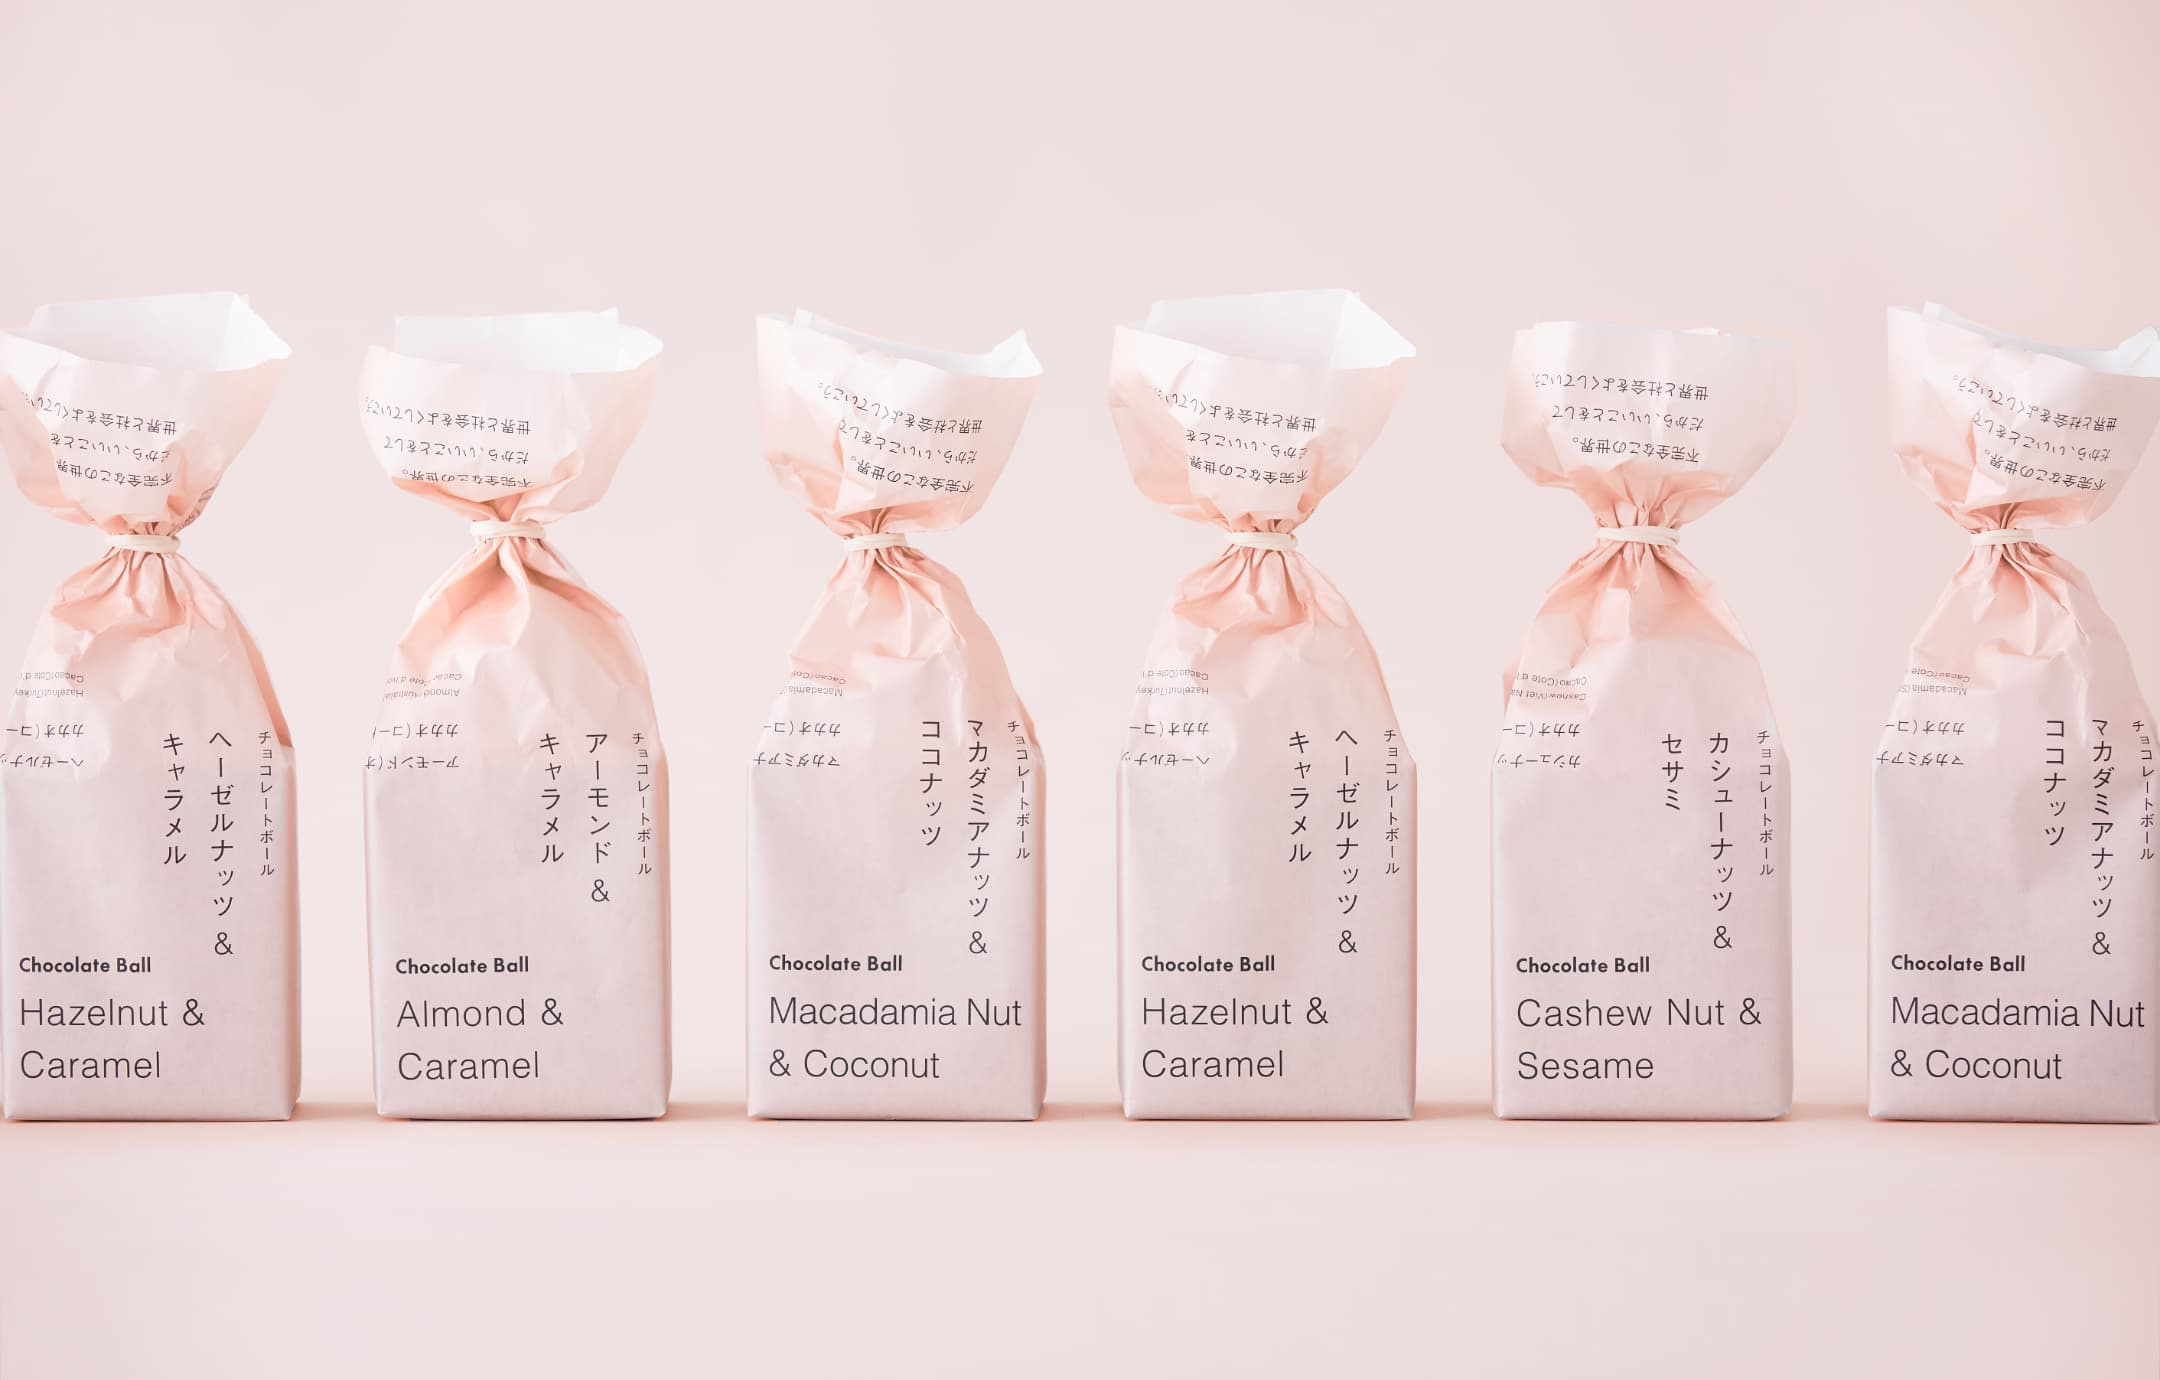 View of chocolate-ball packaging designed by 6D for Imperfect, a café in Tokyo. Image features six packages in pink wrapping paper with black type.